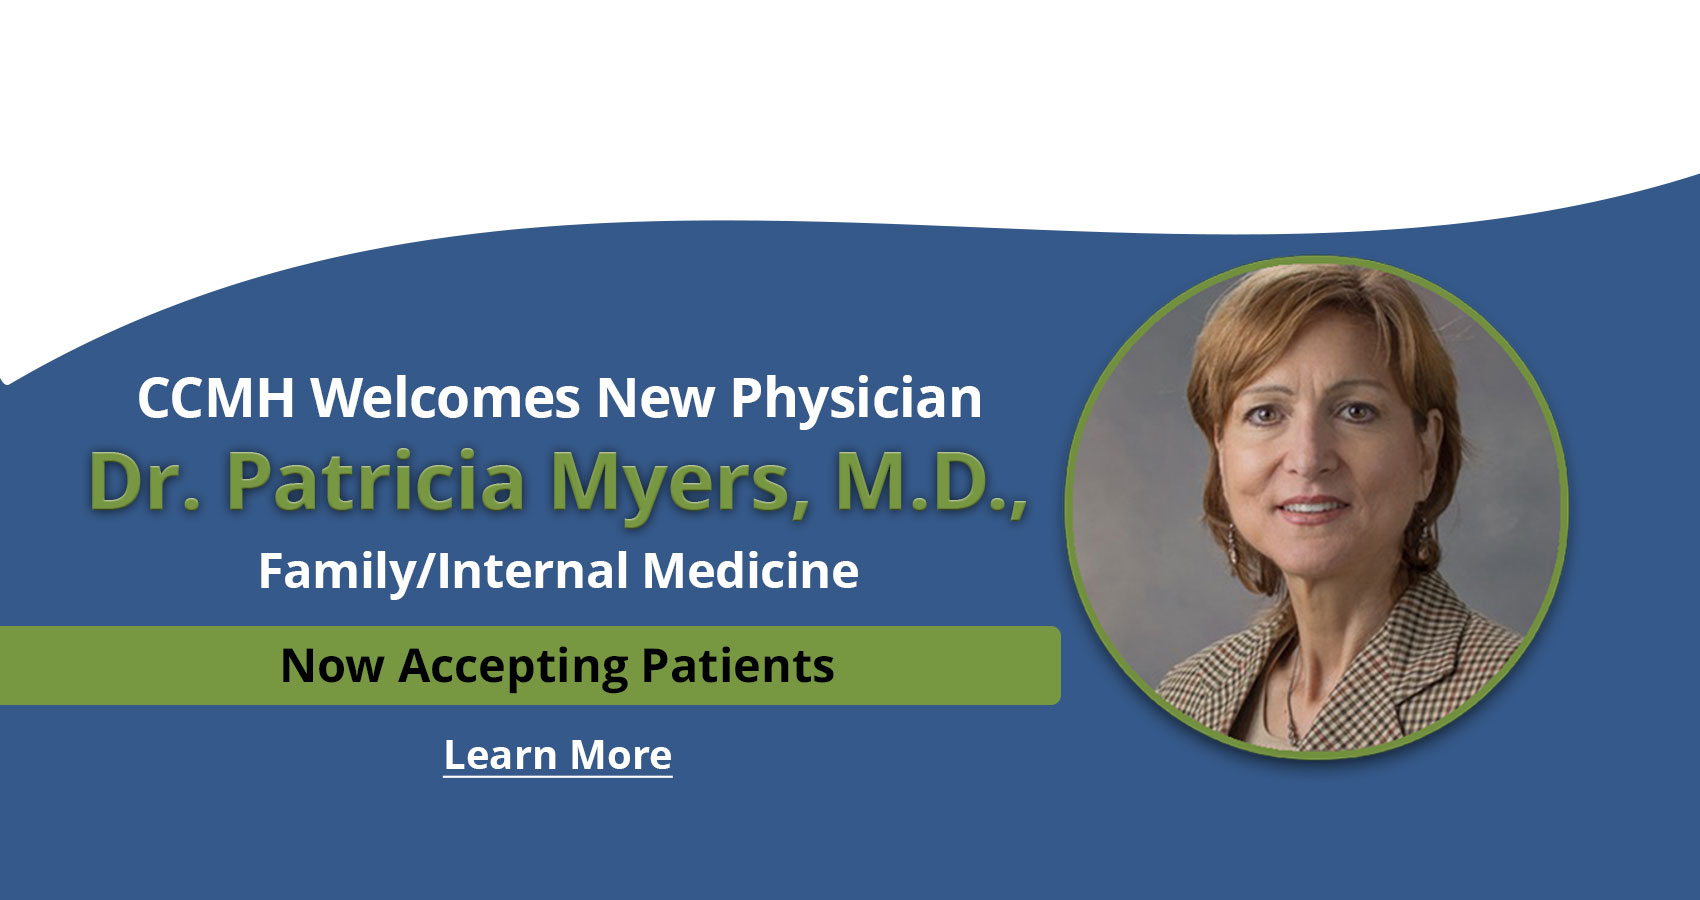 CCMH Welcomes New Physician Dr. Patricia Myers, M.D.,
Family/Internal Medicine
 Now Accepting patients
Learn More